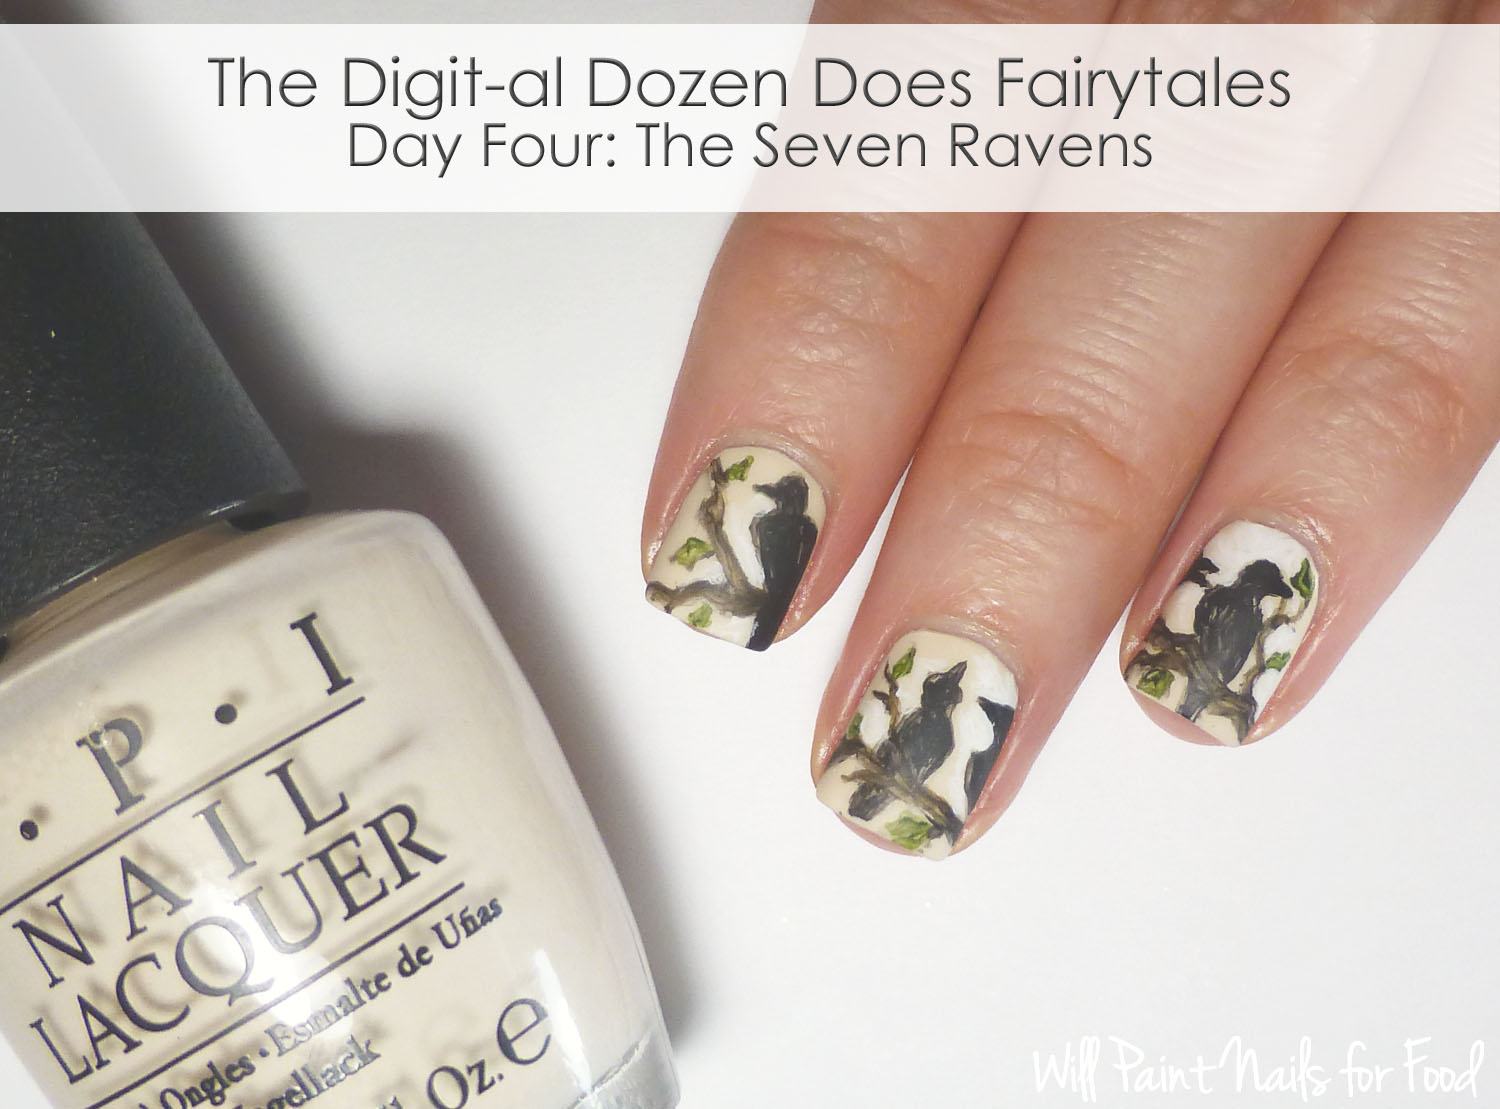 1. "Ravens-inspired nail design with glitter accents" - wide 2